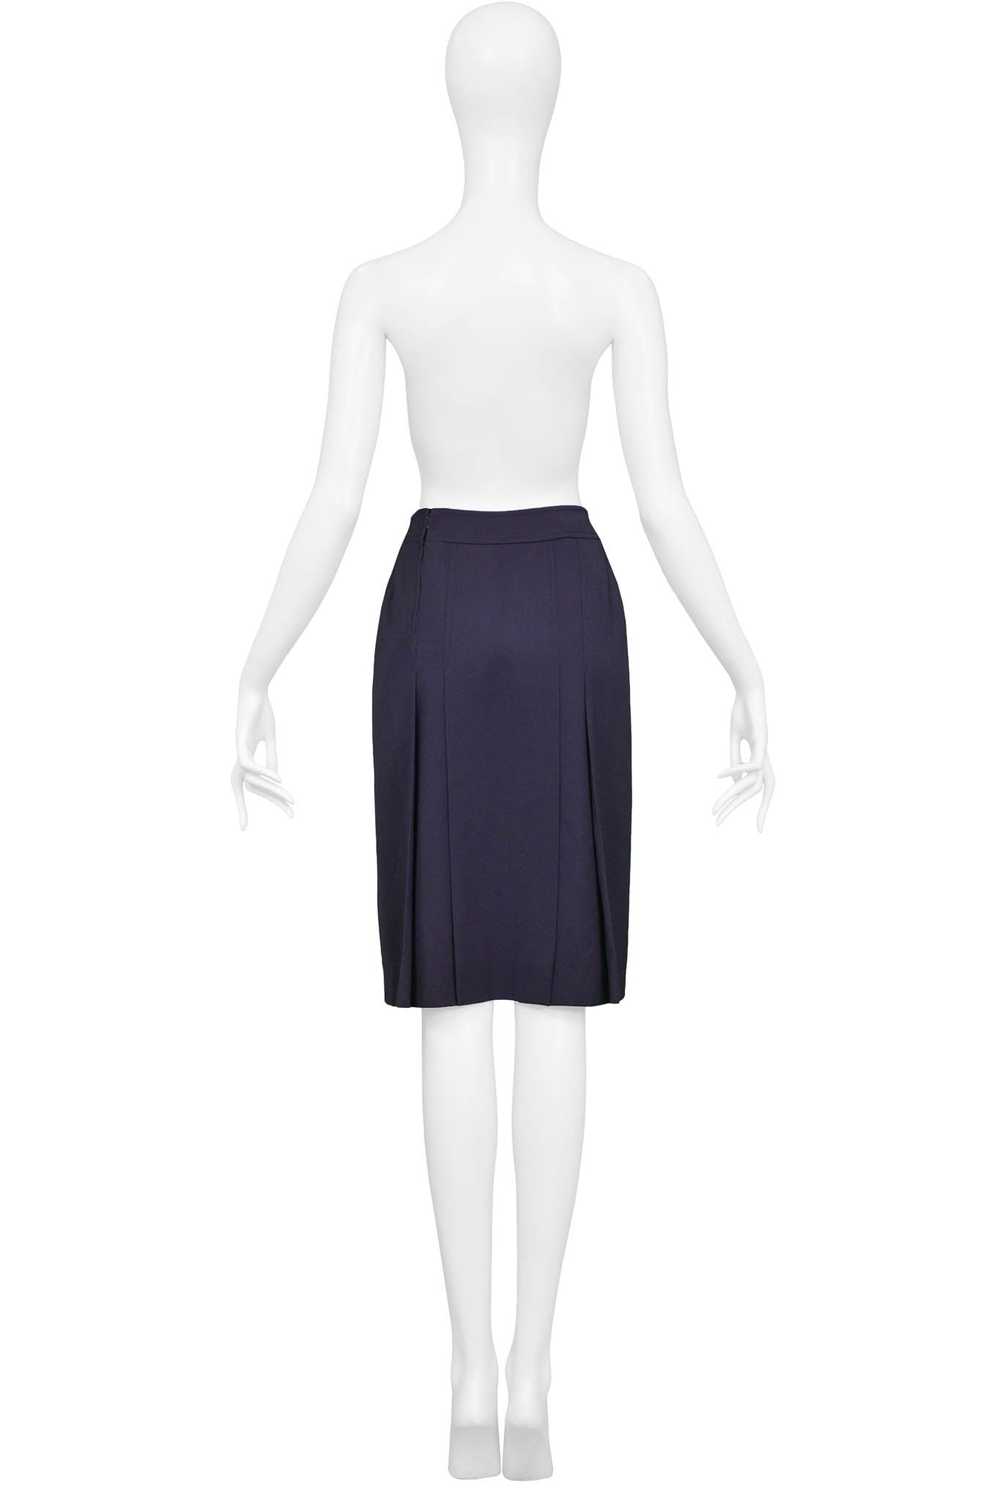 CELINE NAVY PURPLE WOOL SKIRT WITH GOLD LINK - image 2